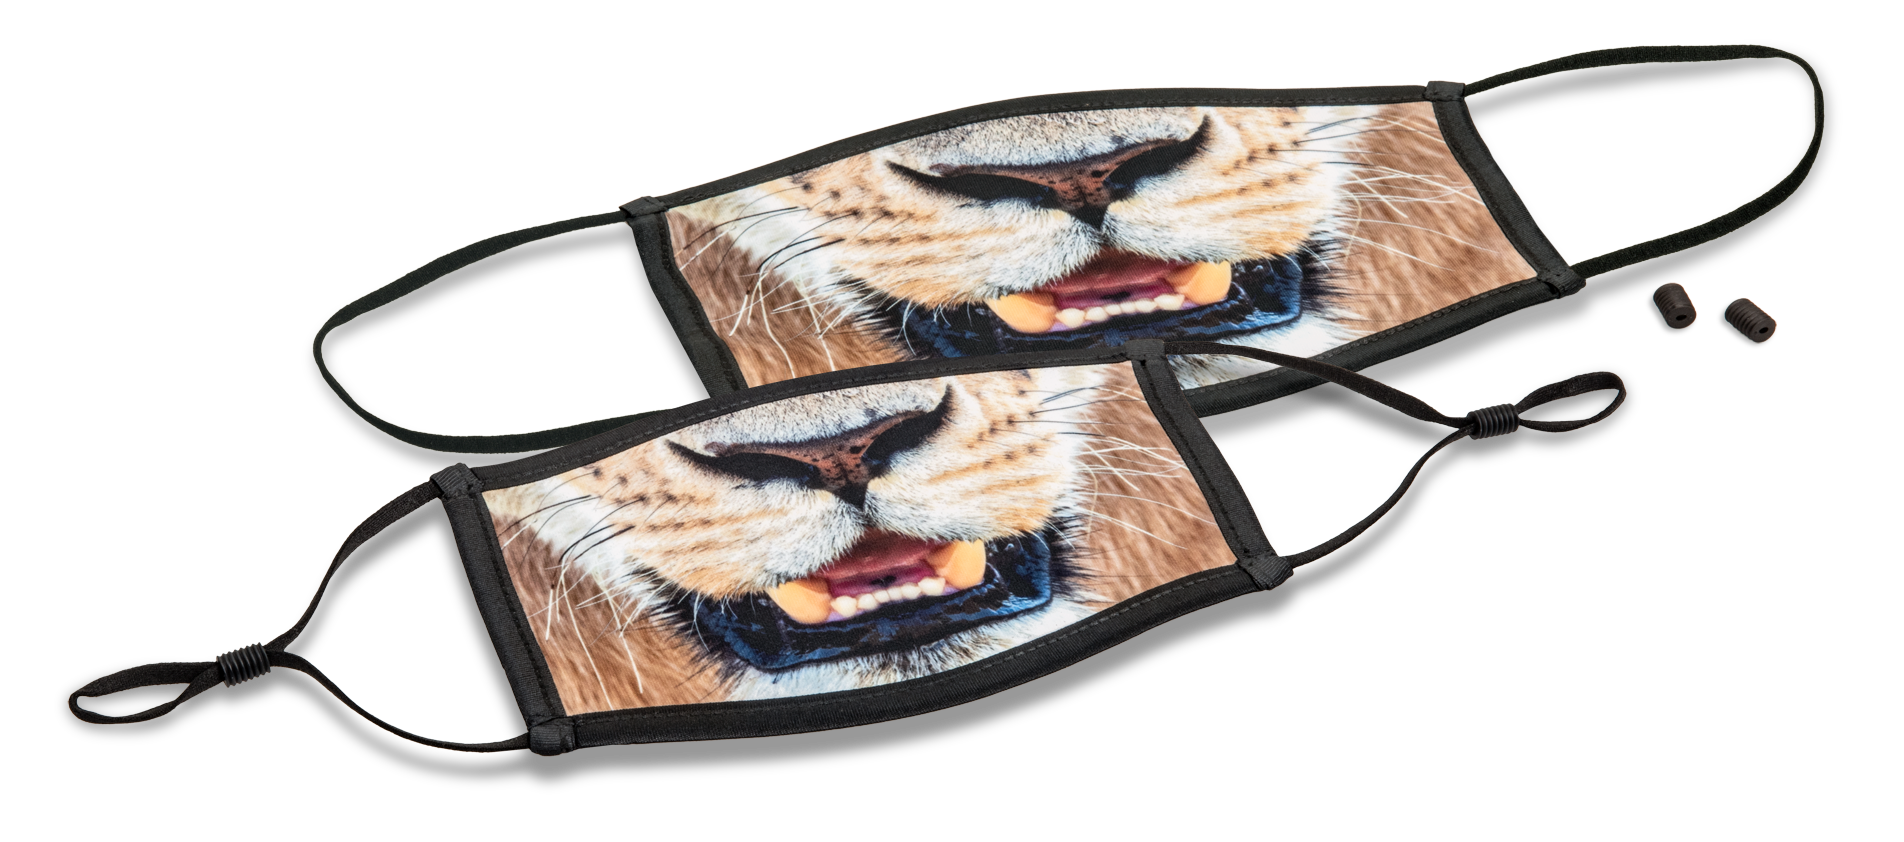 Bay Photo's Custom Printed Face Masks are Dye Sublimated and Cotton Lined for Comfort